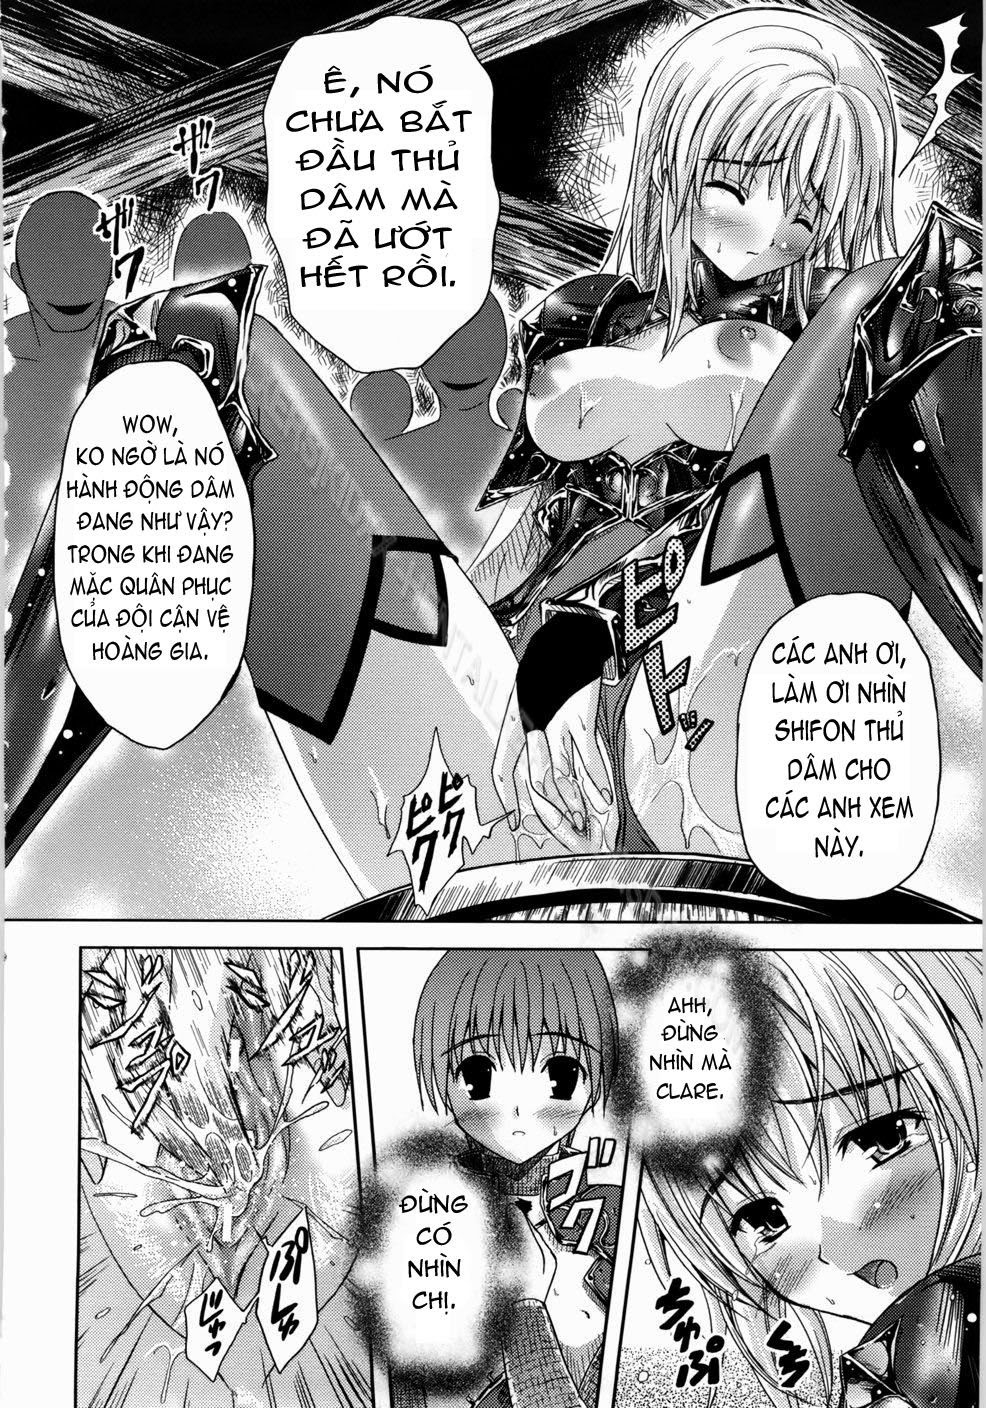 Xem ảnh Collapse Knight - Chapter 3 END - 1603258346914_0 - Hentai24h.Tv